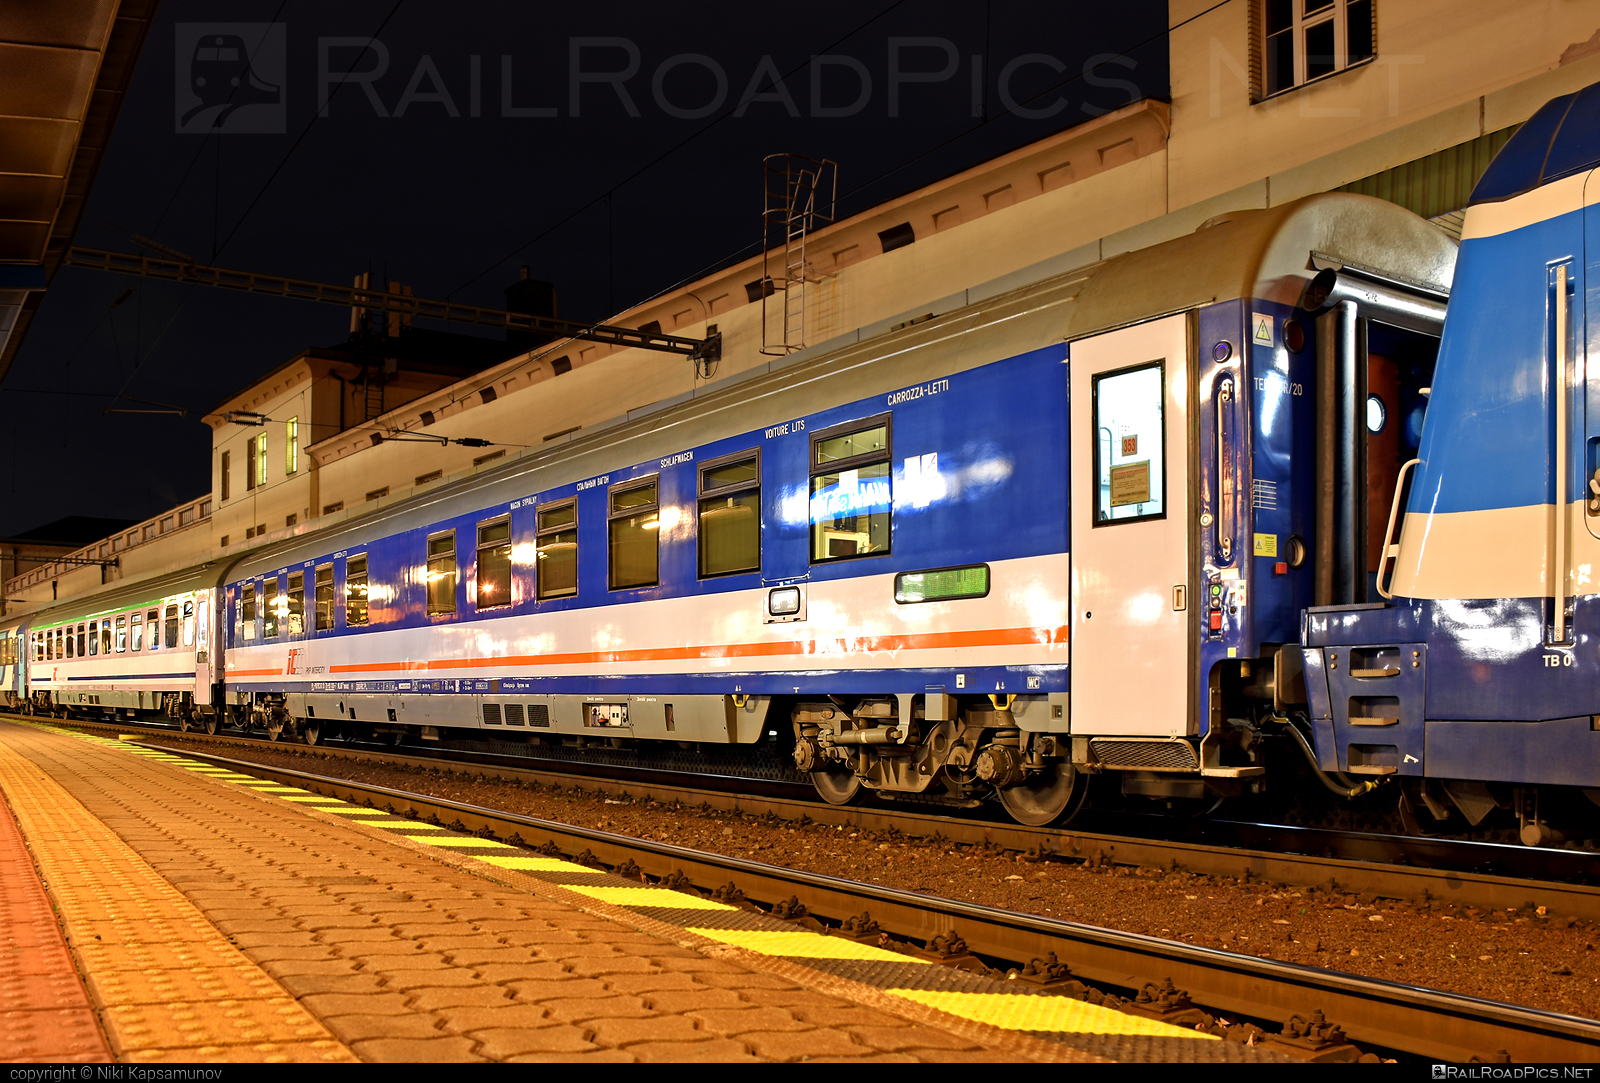 Class WLAB - WLABmnouz - 70-90 006-7 operated by PKP INTERCITY S.A. #mnouz #pkp #pkpic #wlab